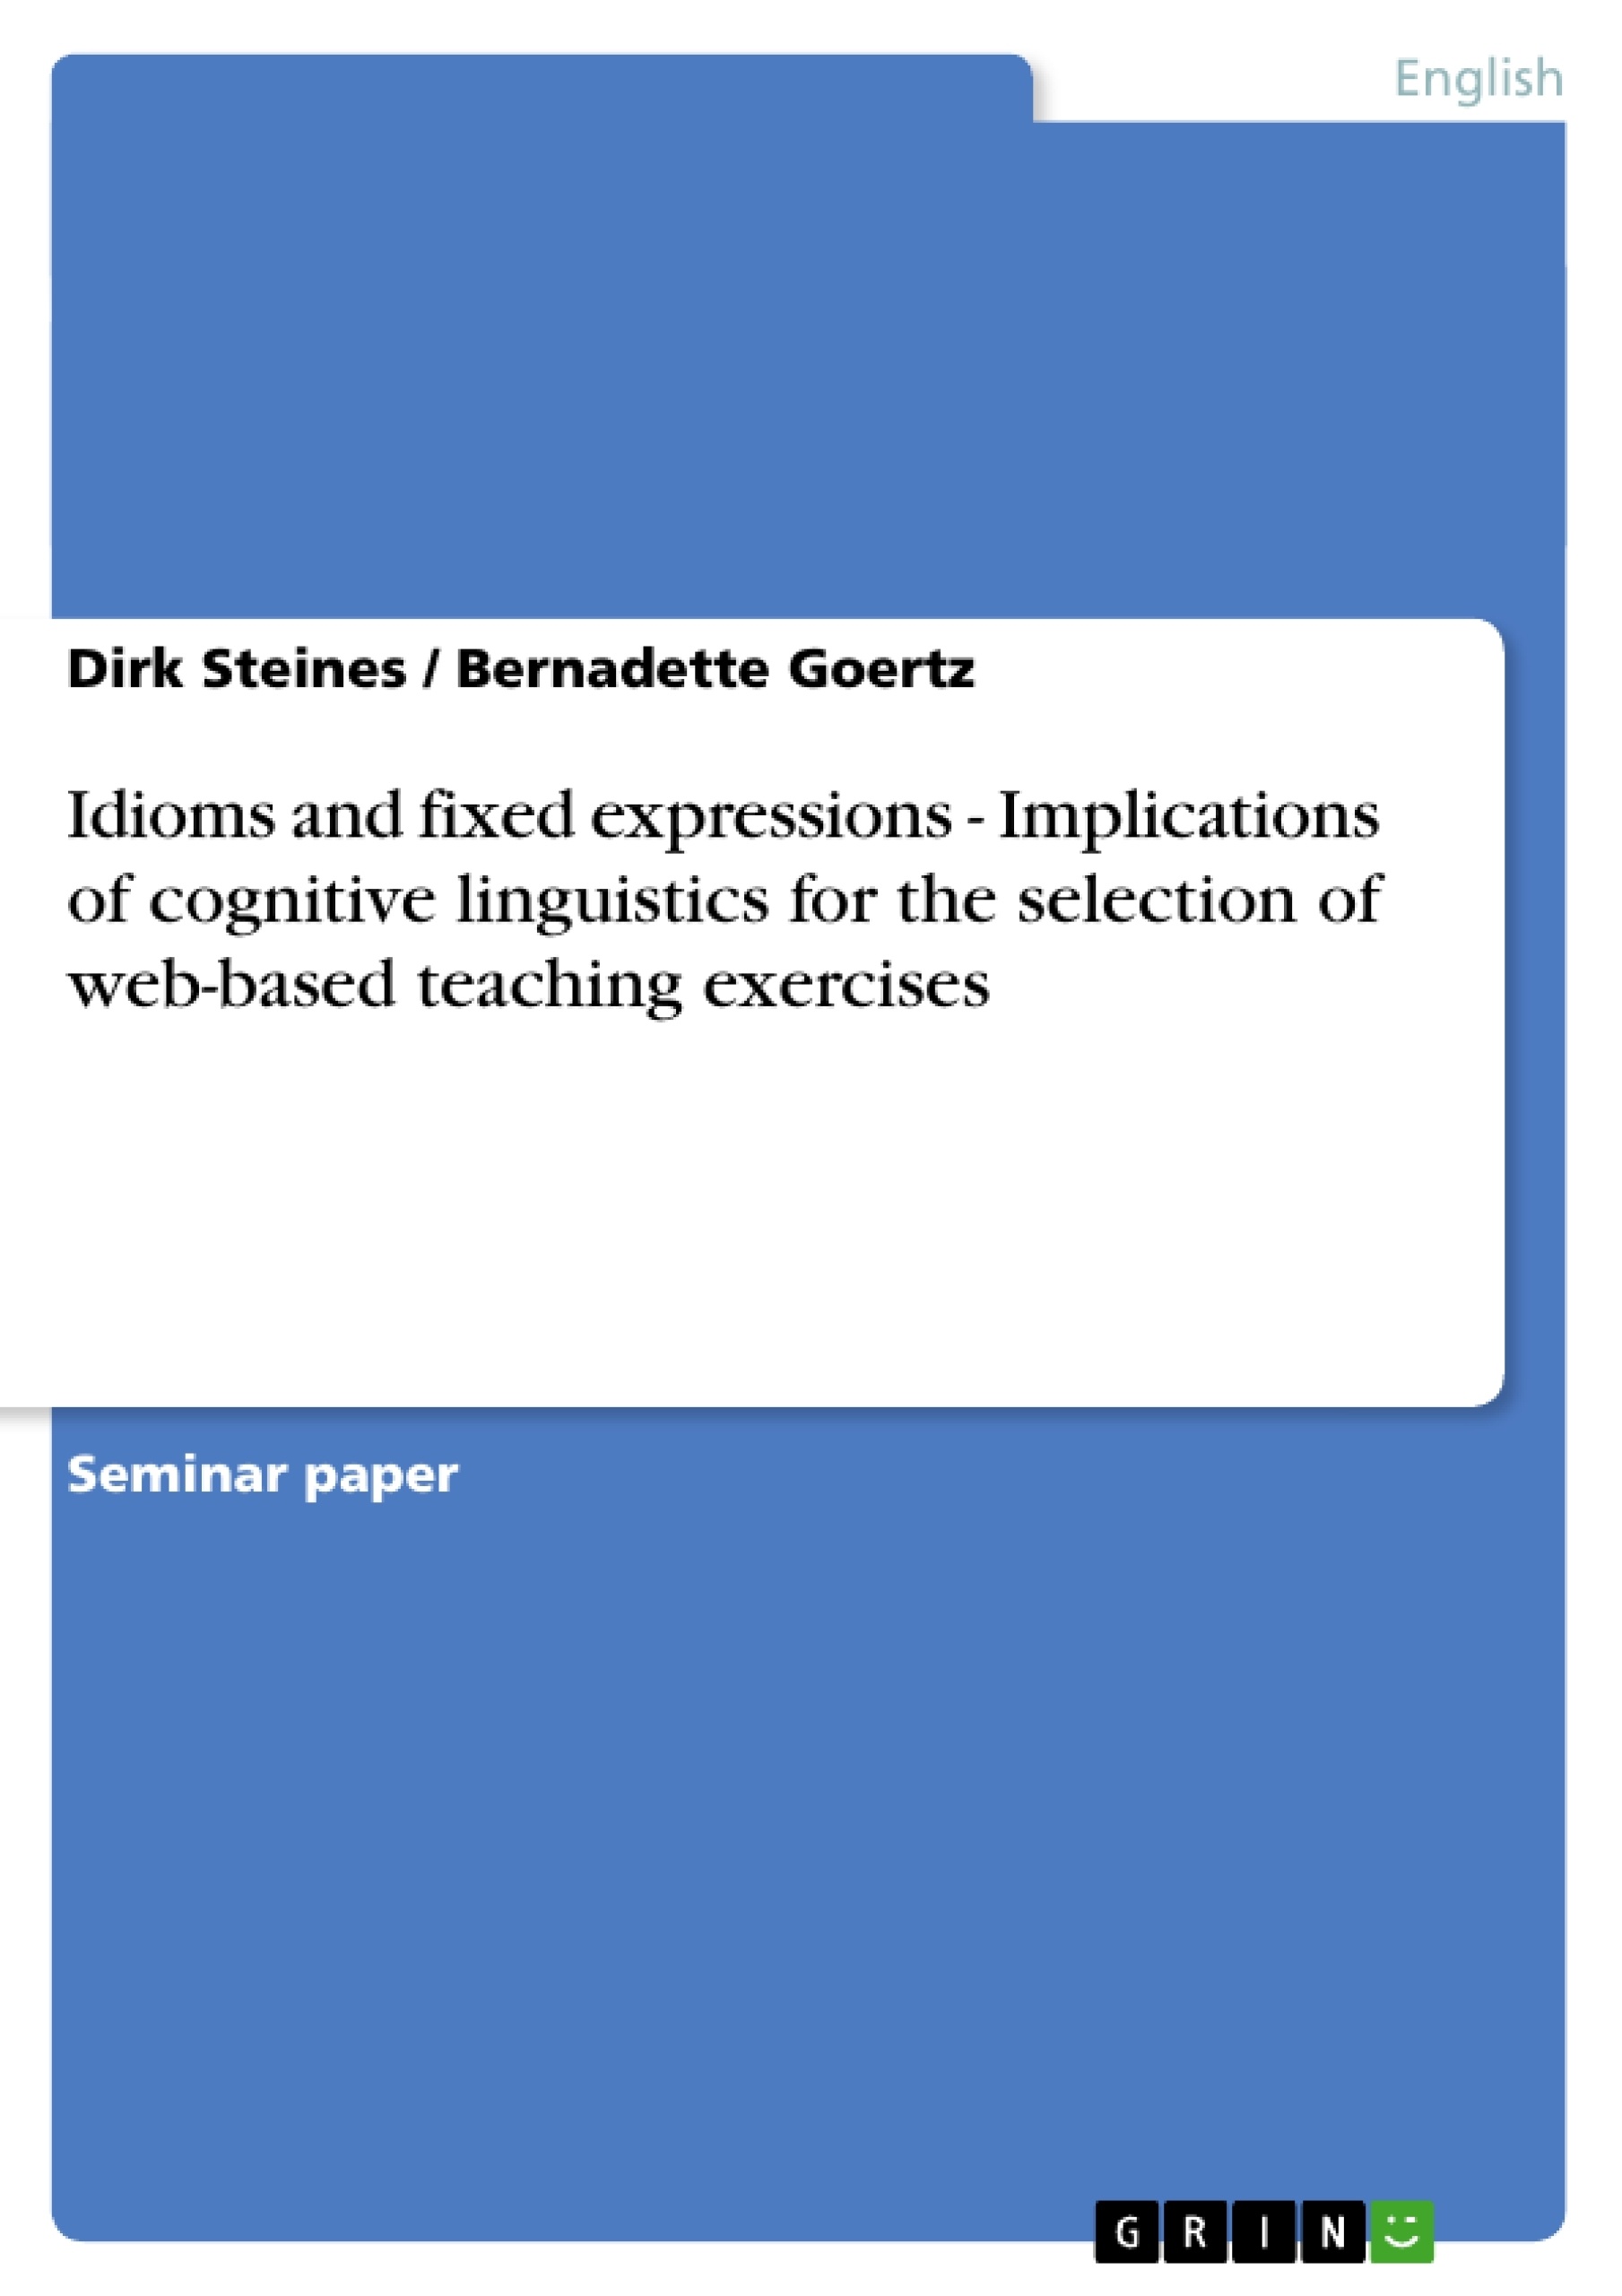 Título: Idioms and fixed expressions - Implications of cognitive linguistics for the selection of web-based teaching exercises